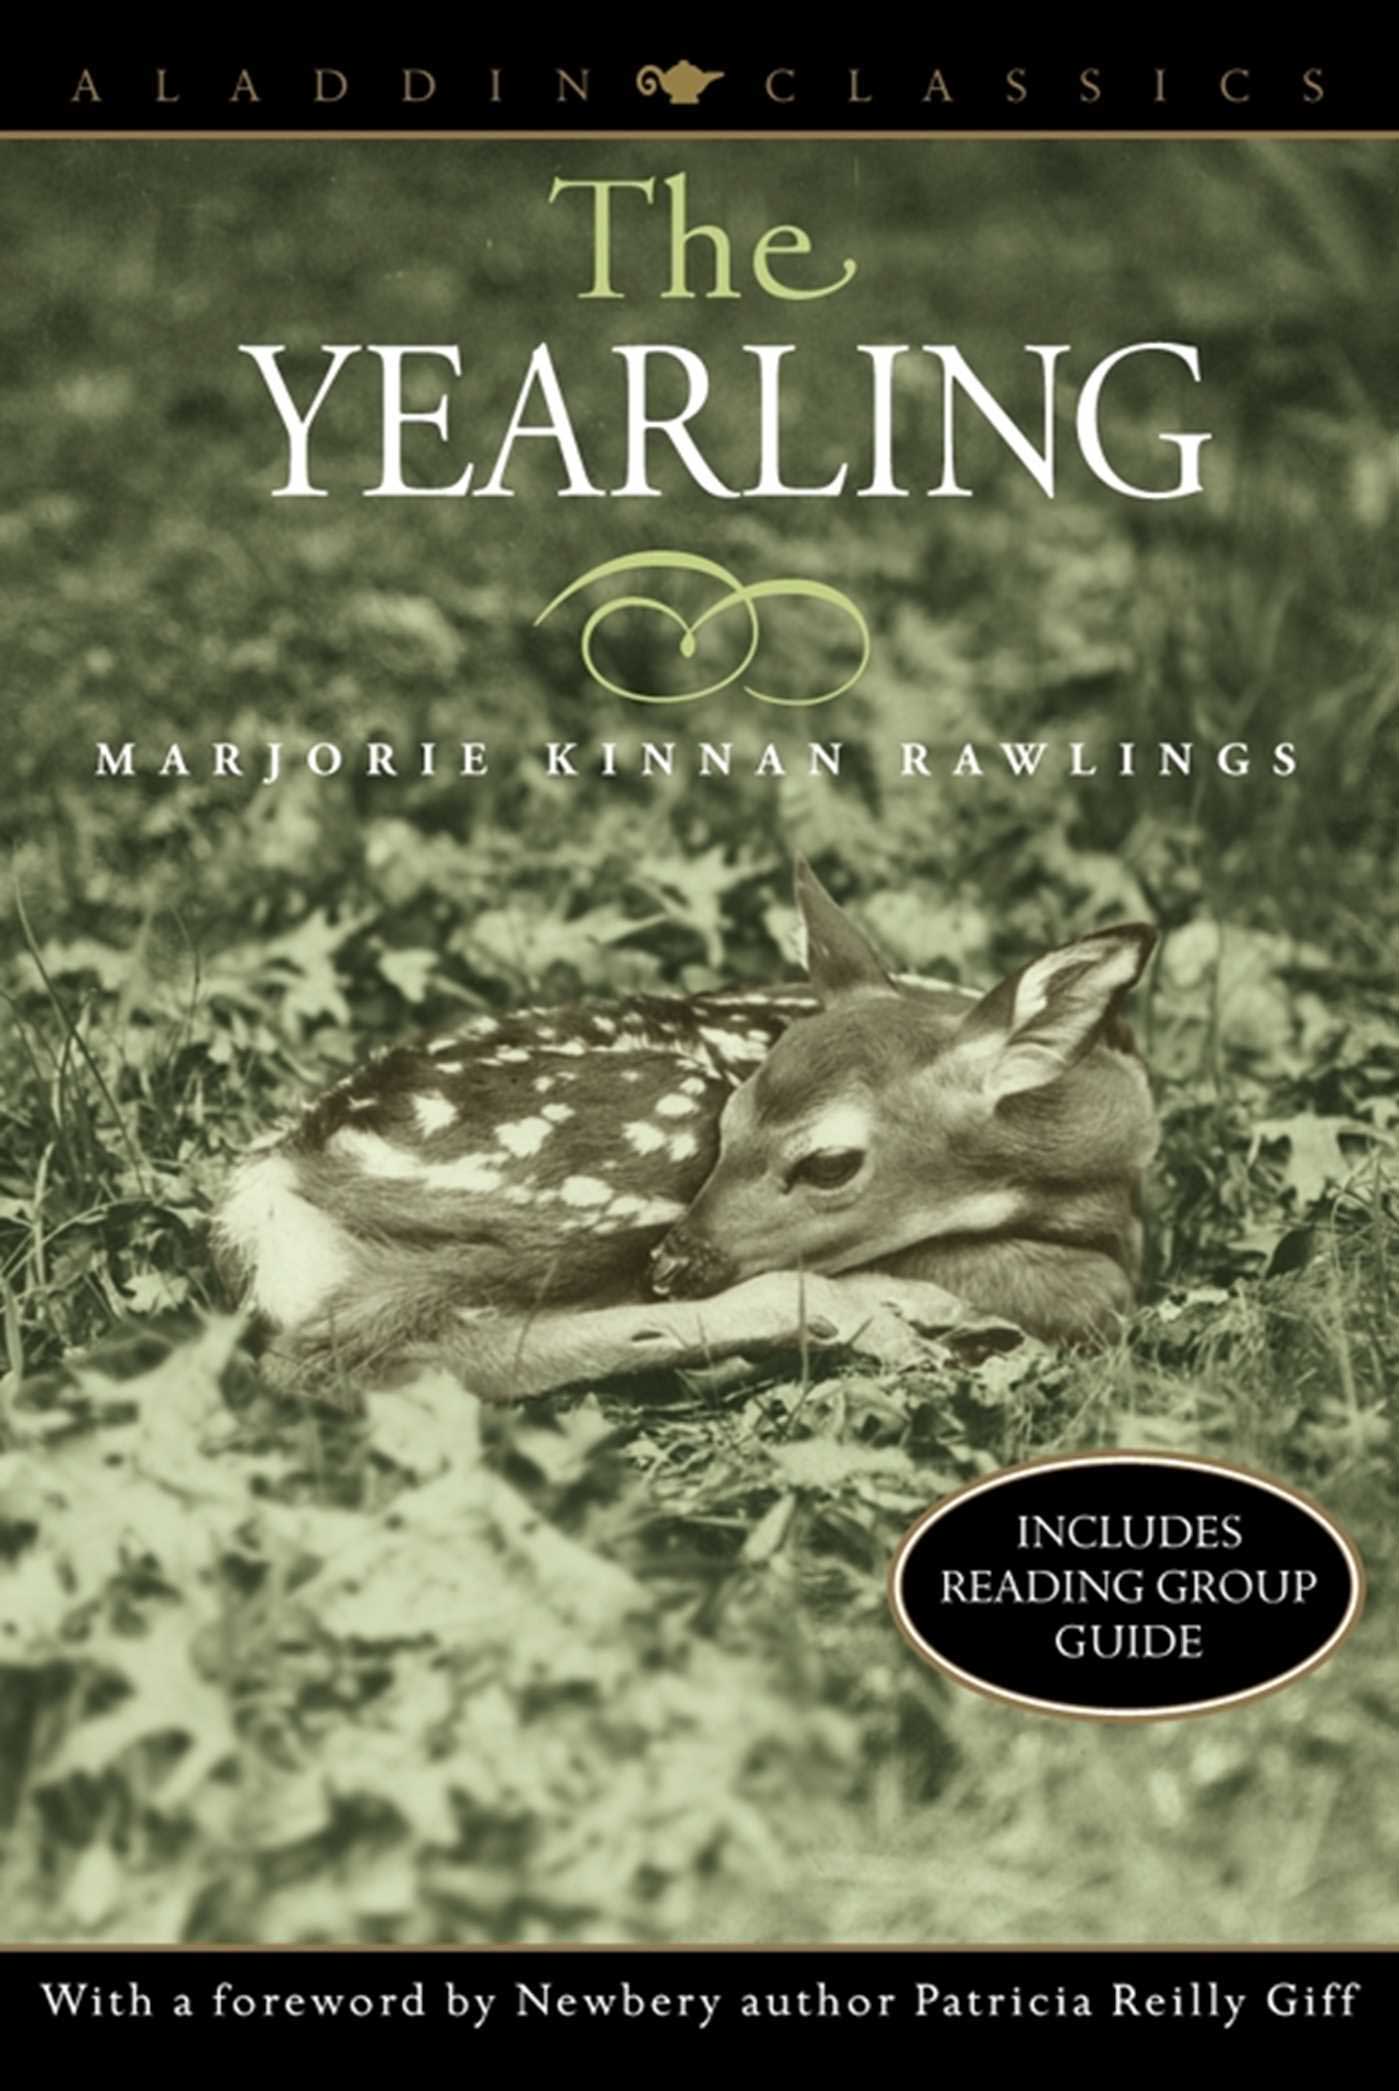 The Yearling, by Marjorie Kinnan Rawlings.
                              
                              
                              
                              A young boy’s attachment to his pet deer becomes a problem for his impoverished family living in the Florida backwoods in the late 19th century with hardly enough to feed themselves.
                              
                              
                              
                              Buy now: The Yearling